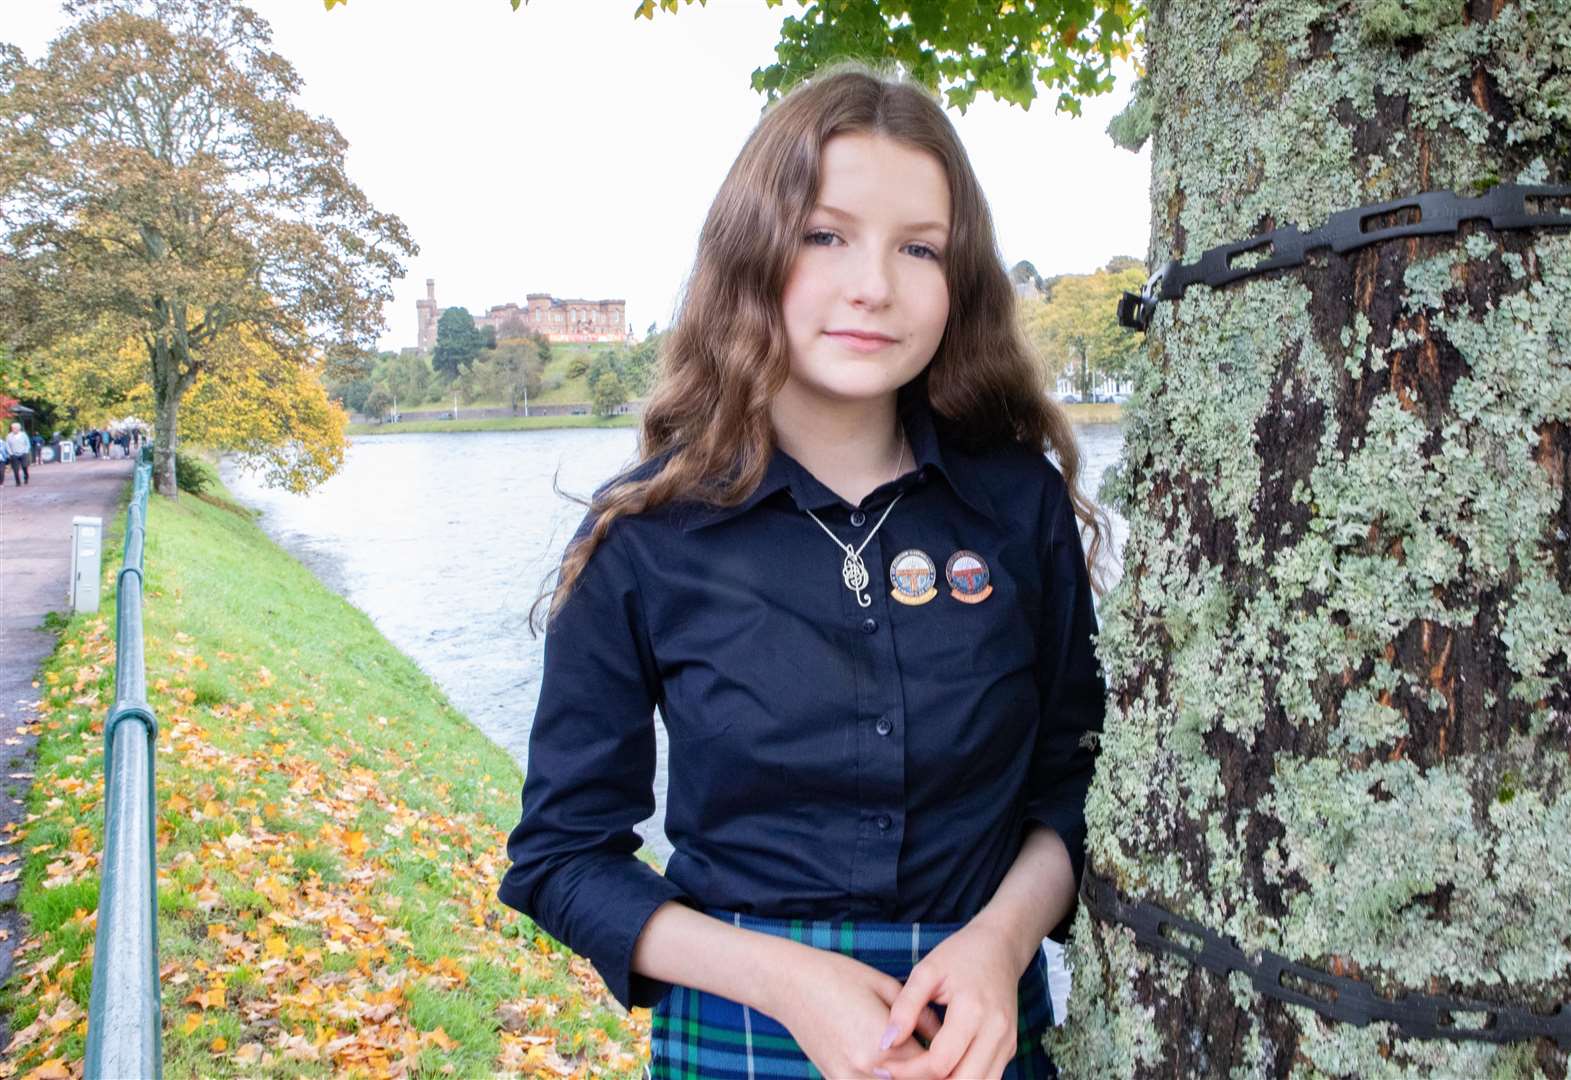 Ellie Ceit Johnson, age 15 from the Isle of Harris, won the Solo Singing Fluent Girls ages 13-15 – An Comunn Gàidhealach Silver Pendant at The Royal National Mòd 2021.